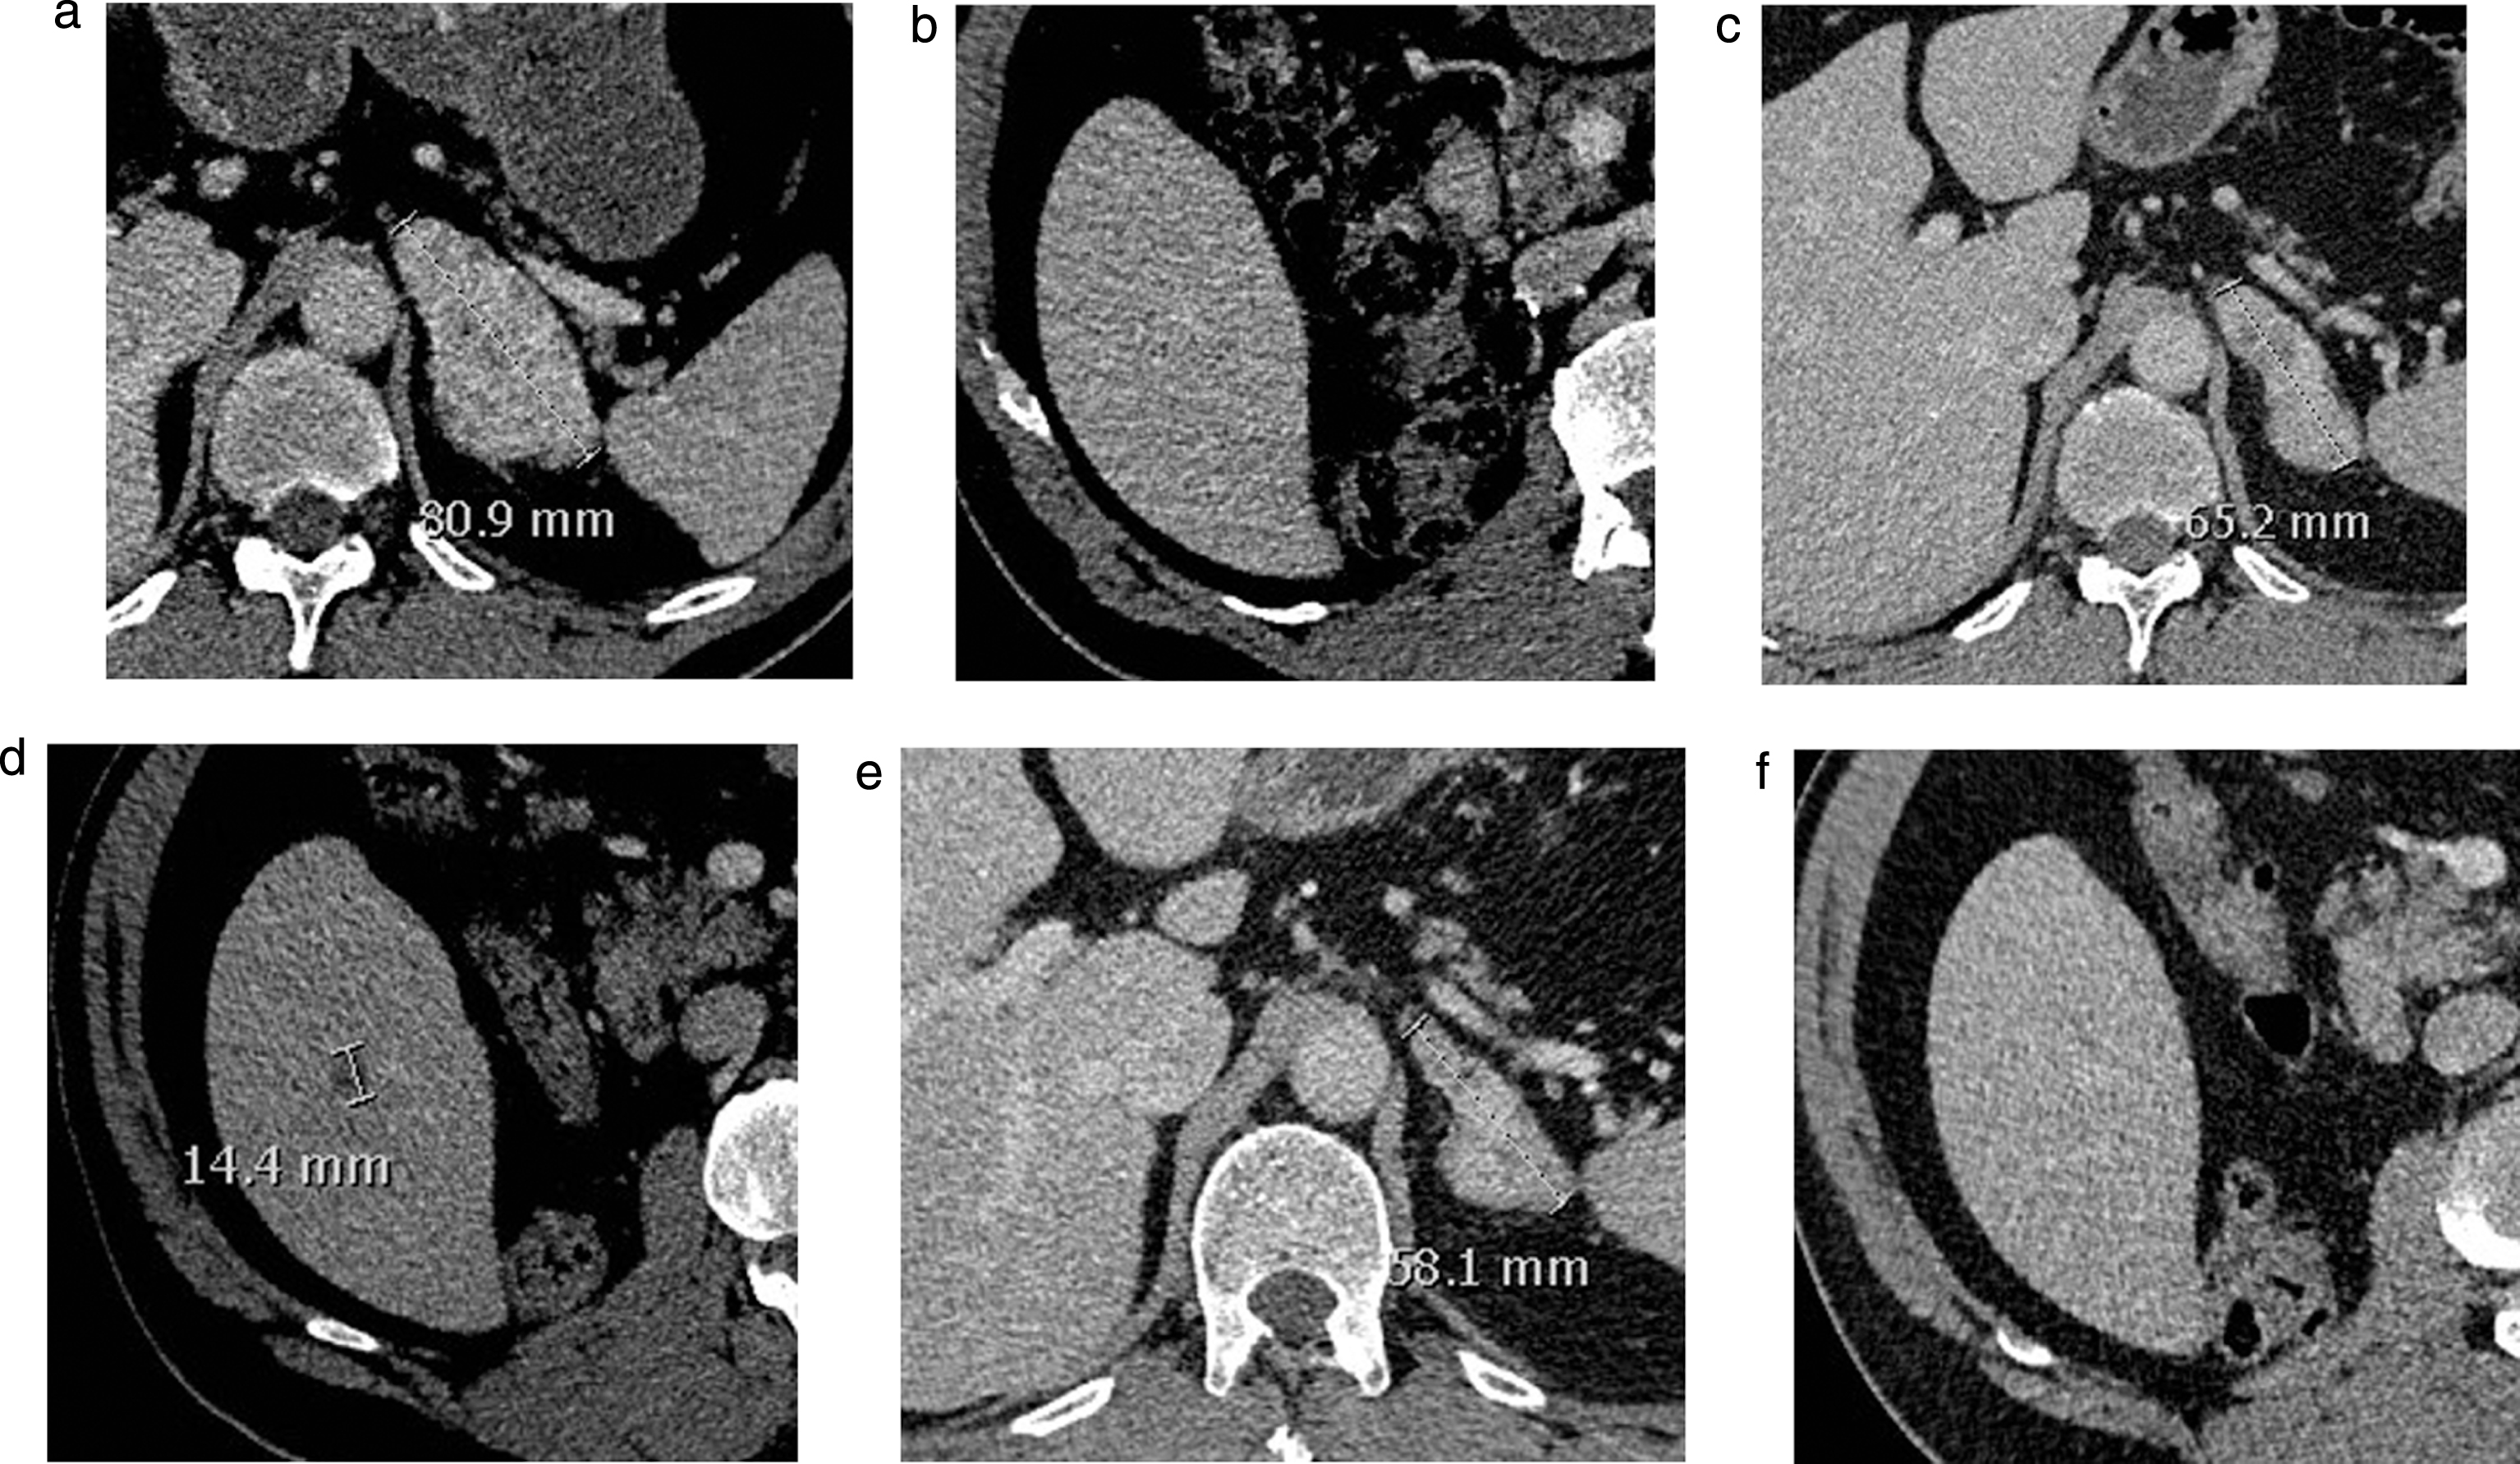 Baseline (a, b) and follow-up CT-scan at 6 months (c, d) and 8 months (e, f) showing an adrenal metastasis (respectively a, c, e) and the liver (respectively b, d, f) in a mRCC patient under nivolumab. No liver lesion was observed on the initial workup (b). A liver lesion appeared after 6 months (d) despite decrease in other lesions (c). On the following workup, the lesion had disappeared, while observing further response of the other lesions. This represents an example of pseudo-progression. The patient went on to respond for 7 months under therapy.